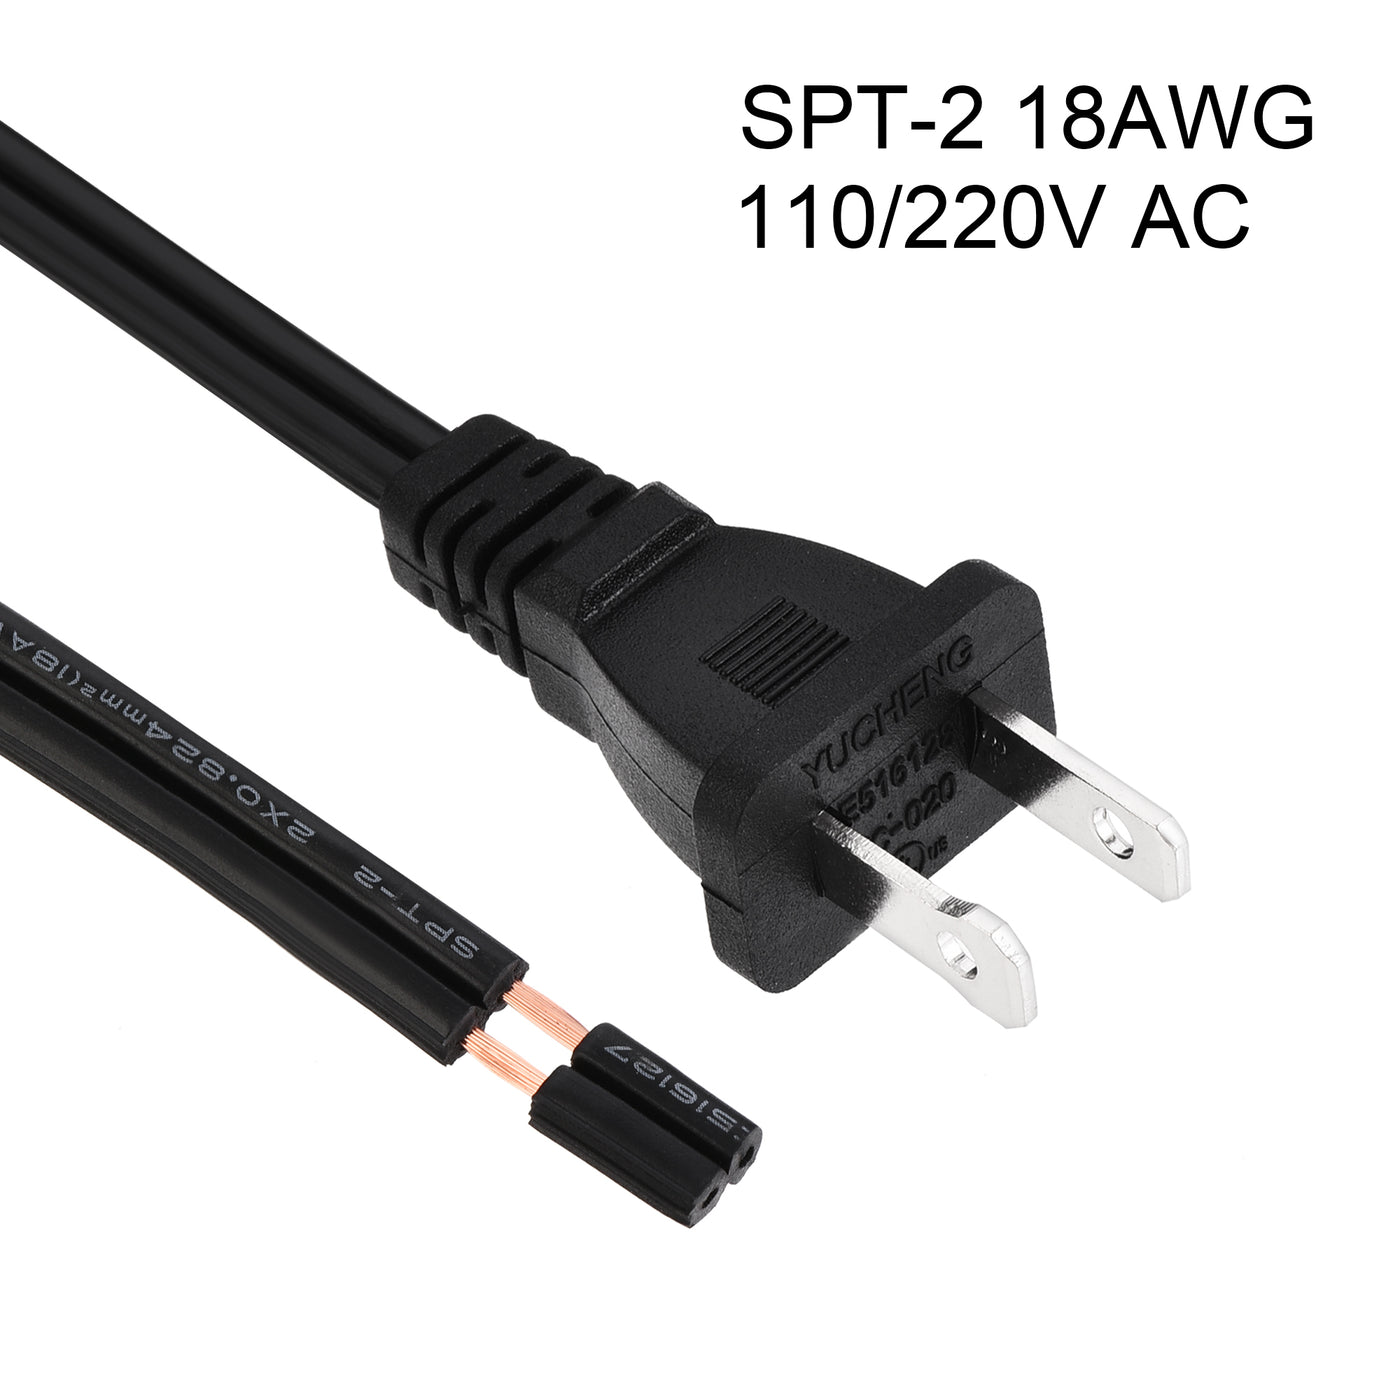 uxcell Uxcell US Plug Lamp Cord with Switch, SPT-2 18AWG Power Wire 1.8M Black, UL Listed 2Pcs